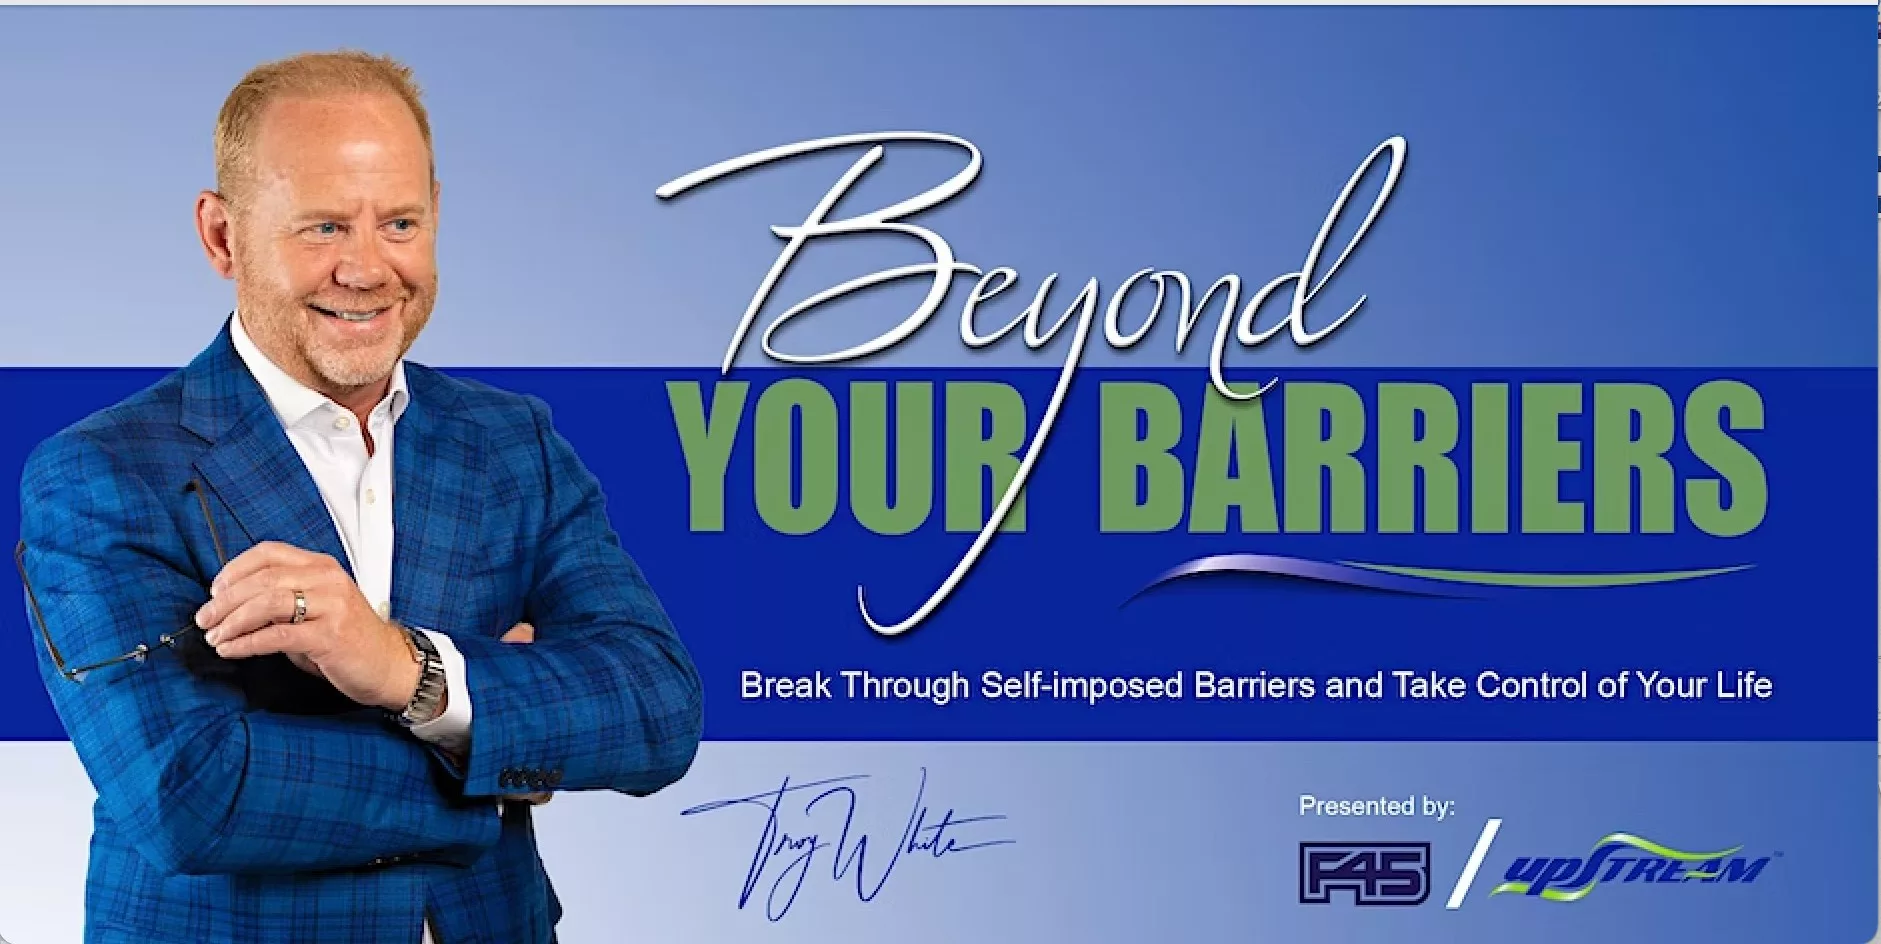 BEYOND YOUR BARRIERS